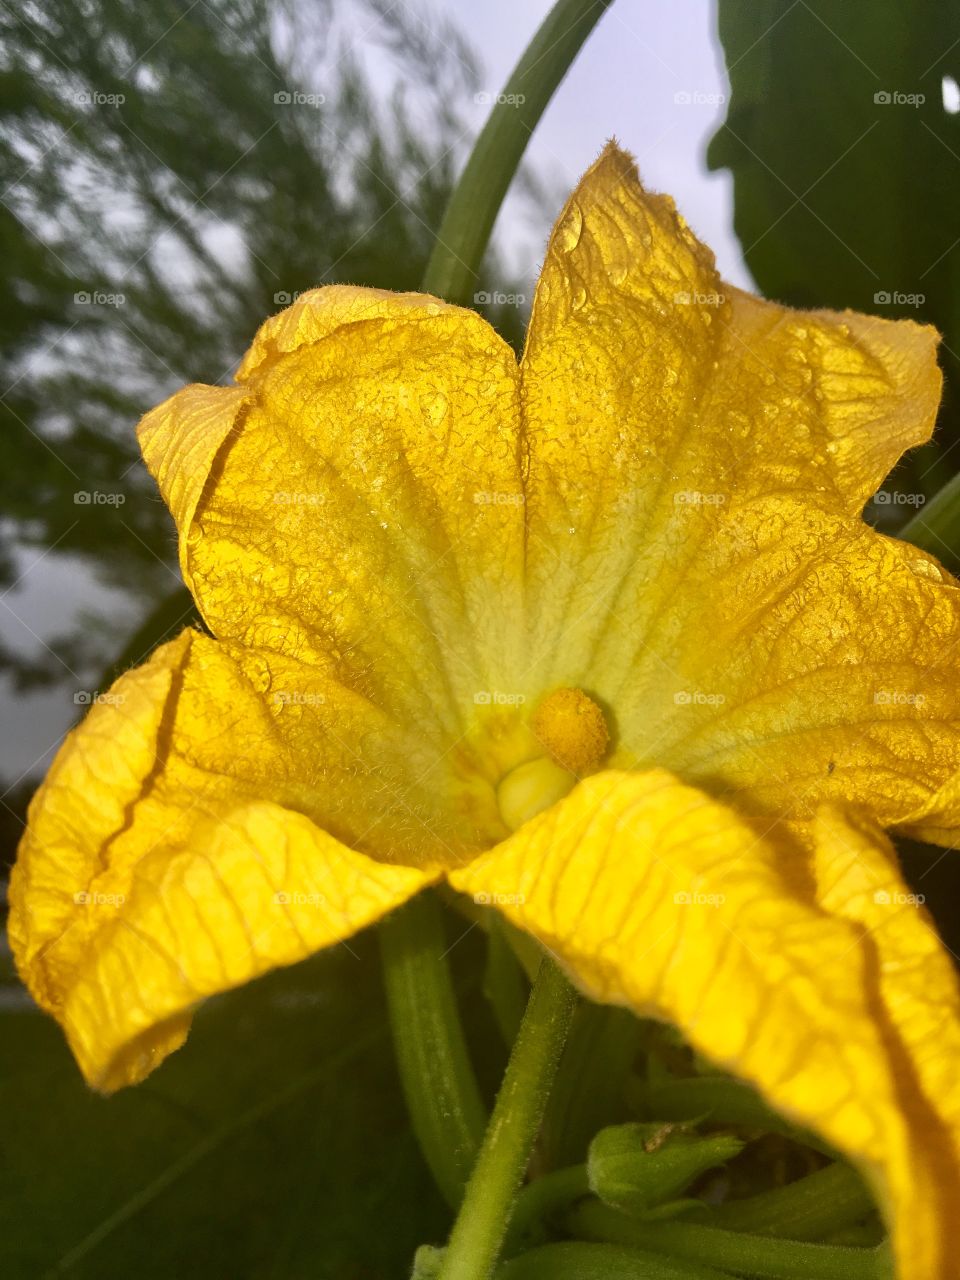 A zucchini flower that has blossomed. The peddles shine as though they have been dusted with gold. It is quite a cold gloomy day and this flower emits a brightness that can be seen through the darkness.